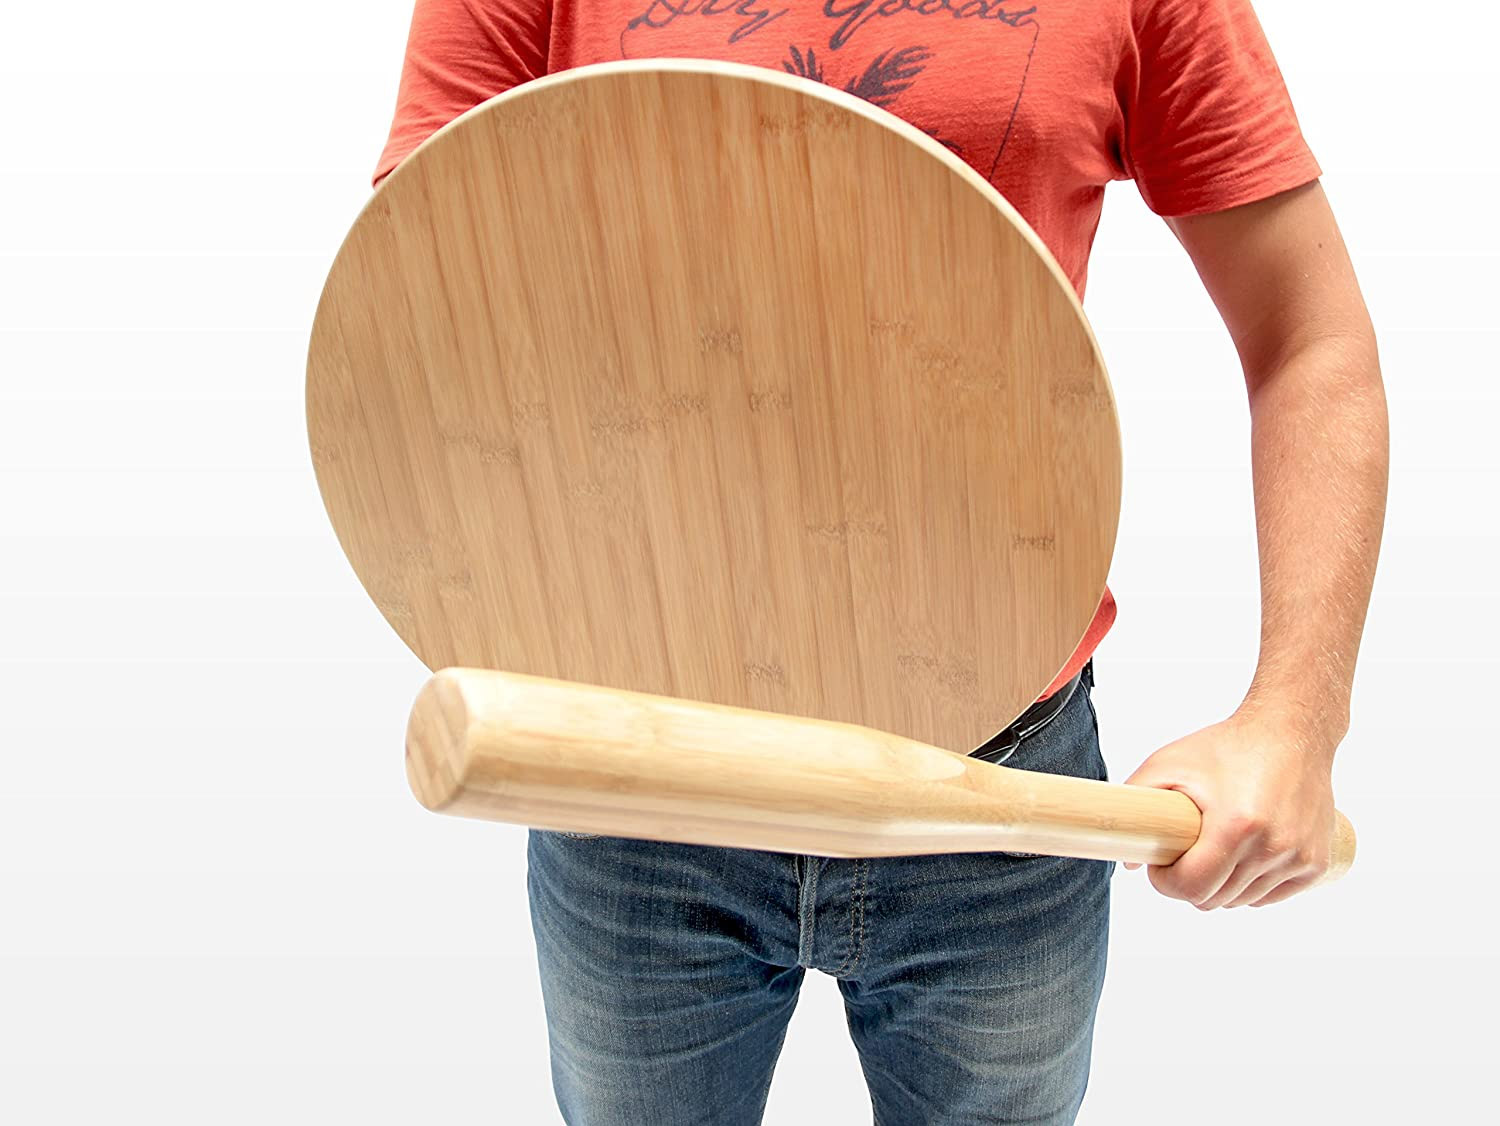 Nightstand Turns Into a Bat and Shield For Self-Defense - Self-defense nightstand